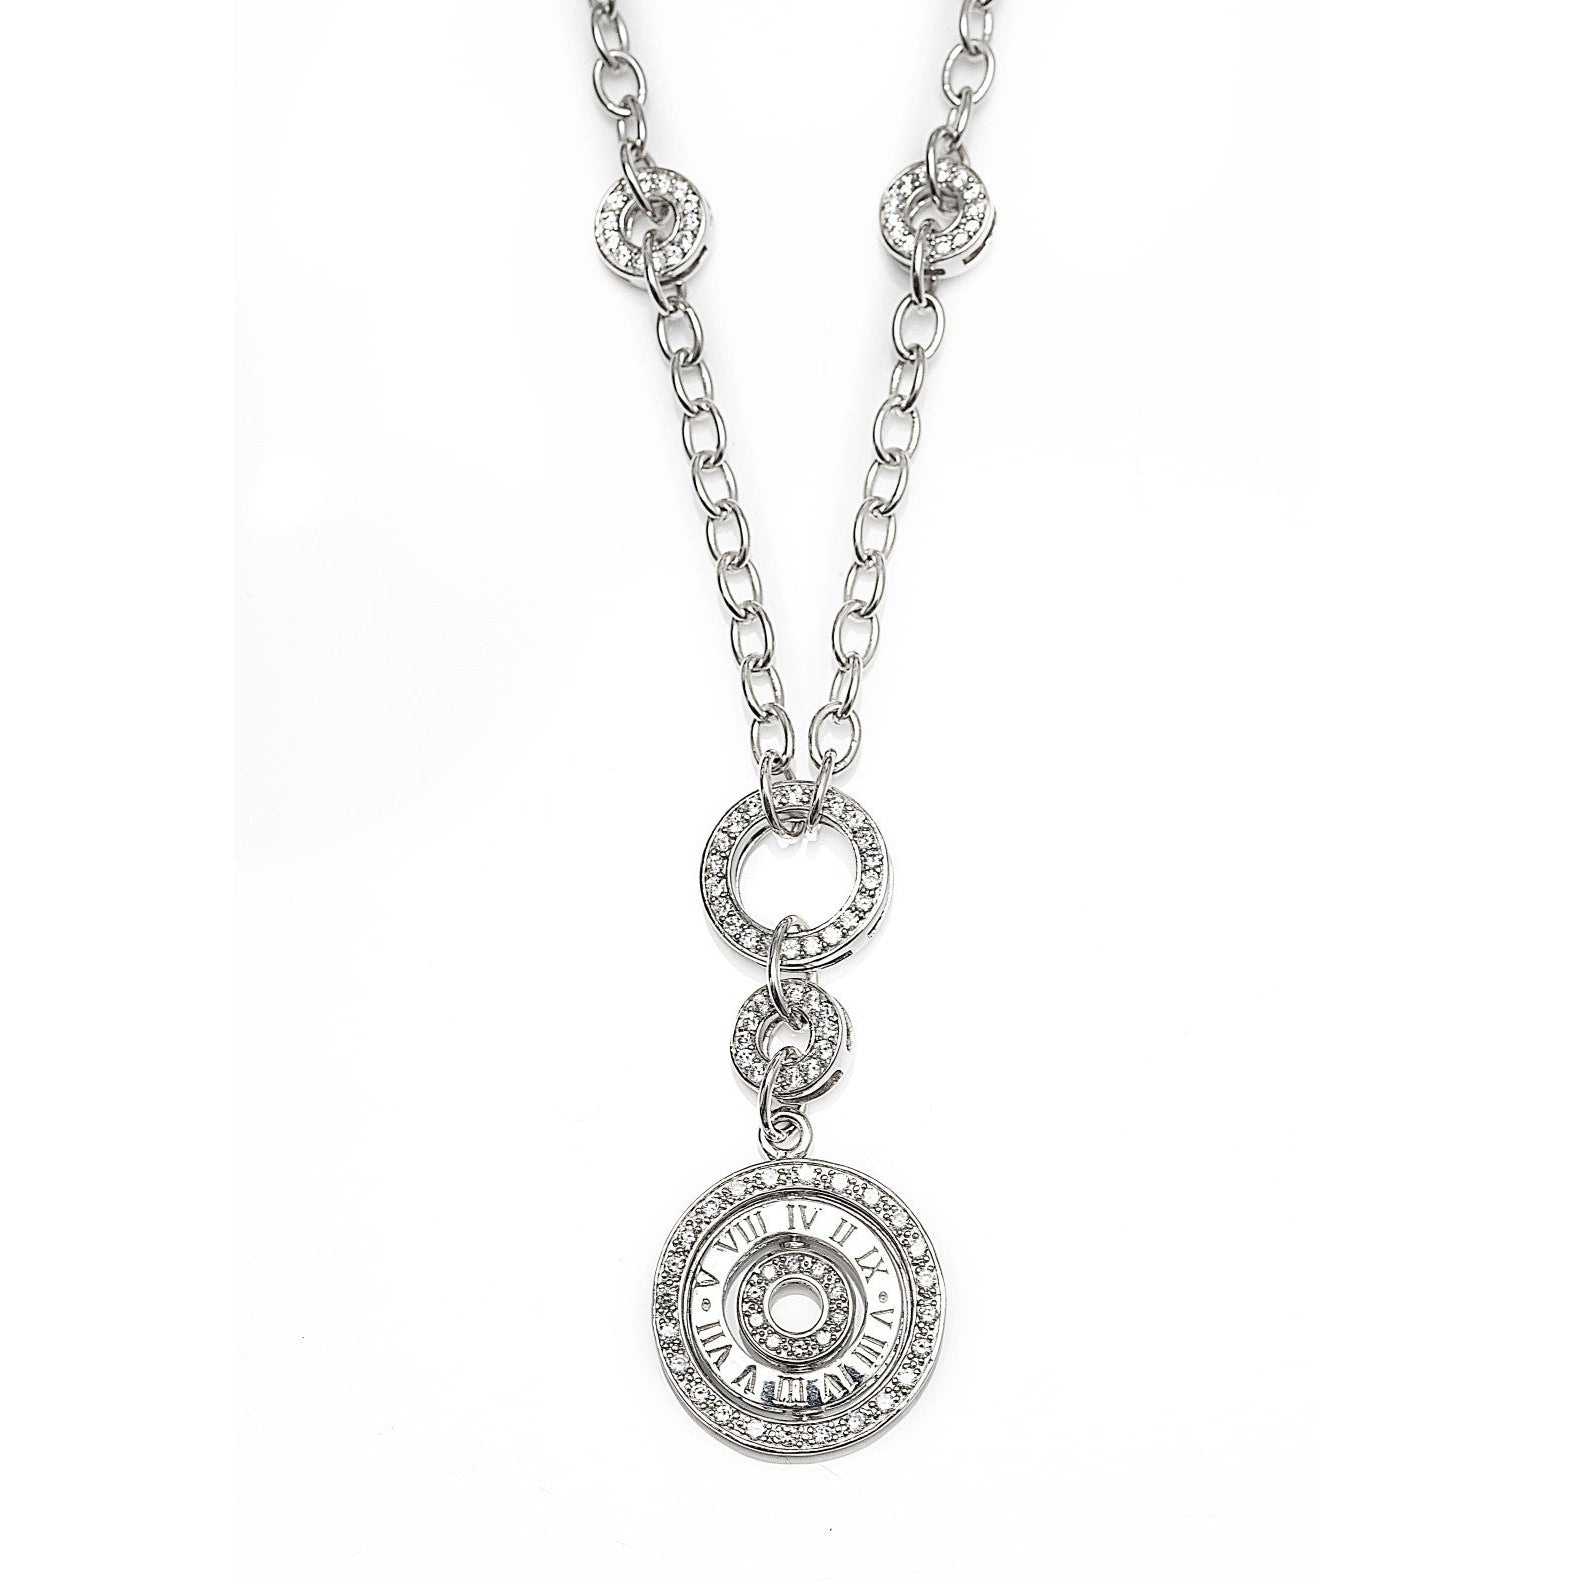 Amazing Short Juicy Necklace in 925 Sterling Silver with a Flip Pendant with Roman Numerals and cubic zirconia. Worldwide shipping from Australia.  Affordable luxury jewellery by Bellagio & Co.